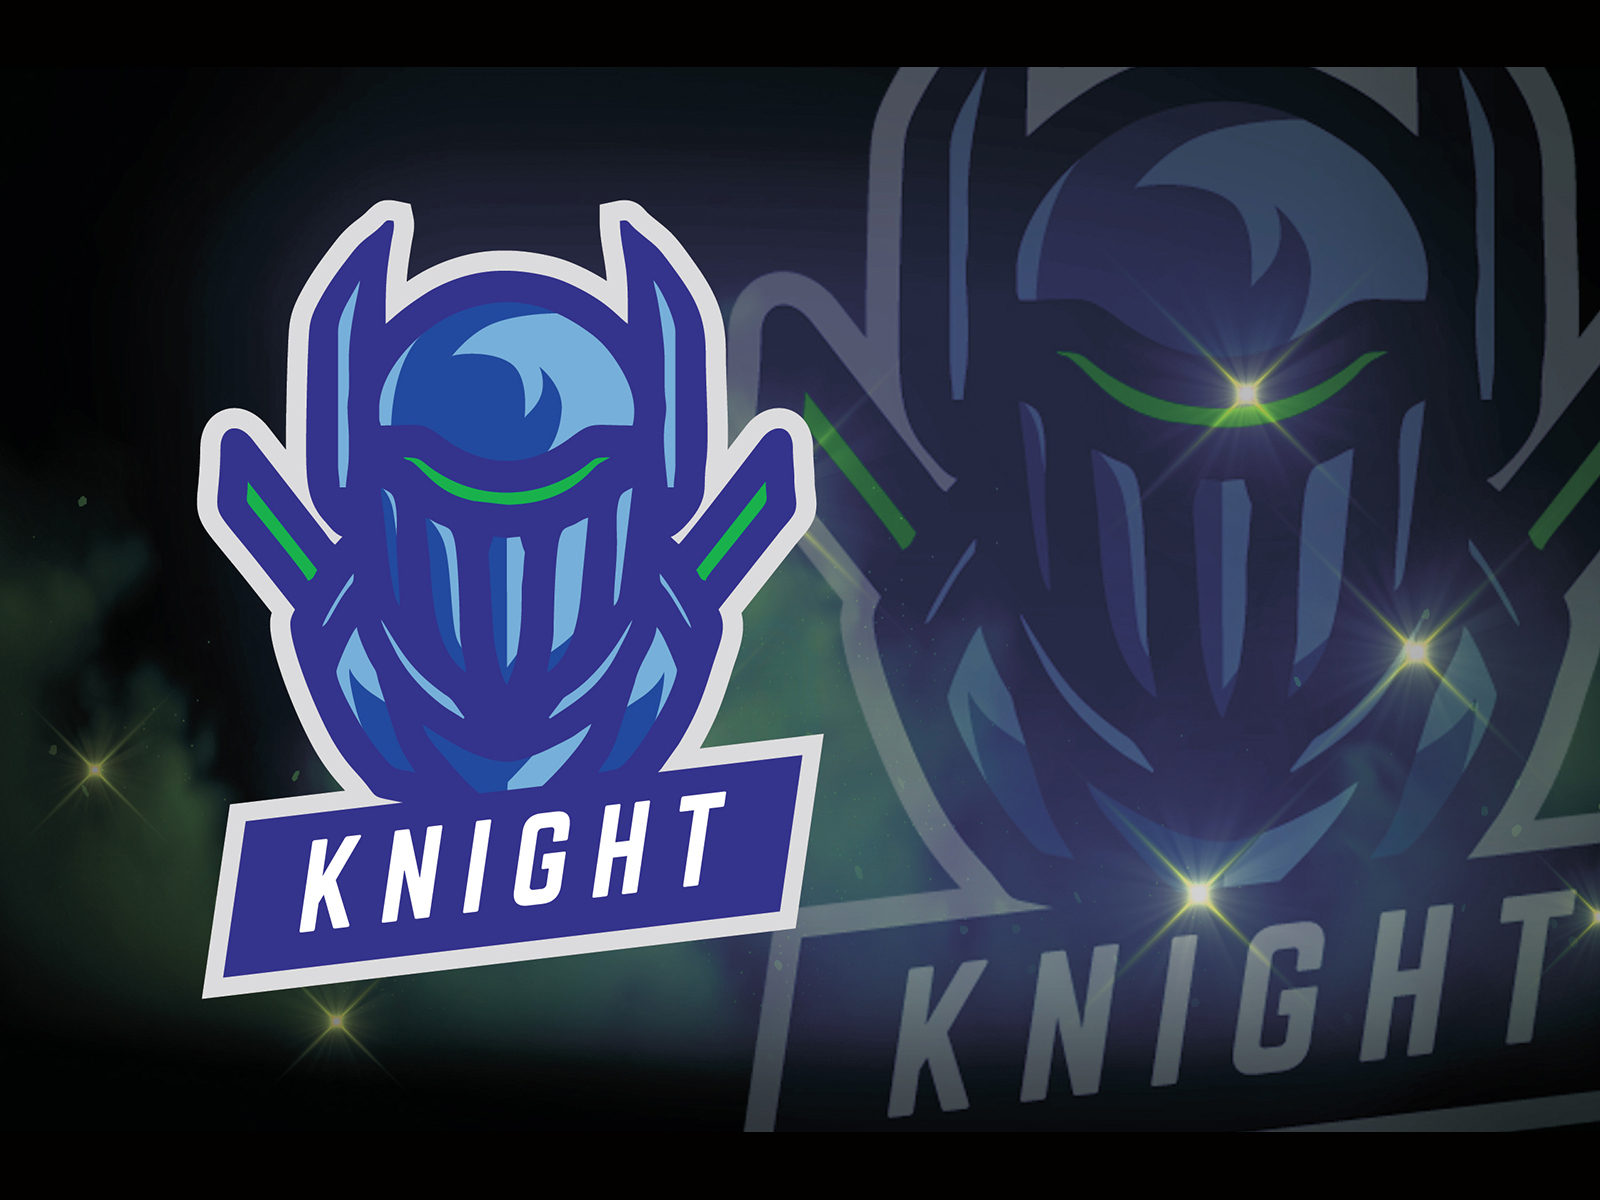 Download Free Knight Logo Esport By Remarena On Dribbble PSD Mockup Template